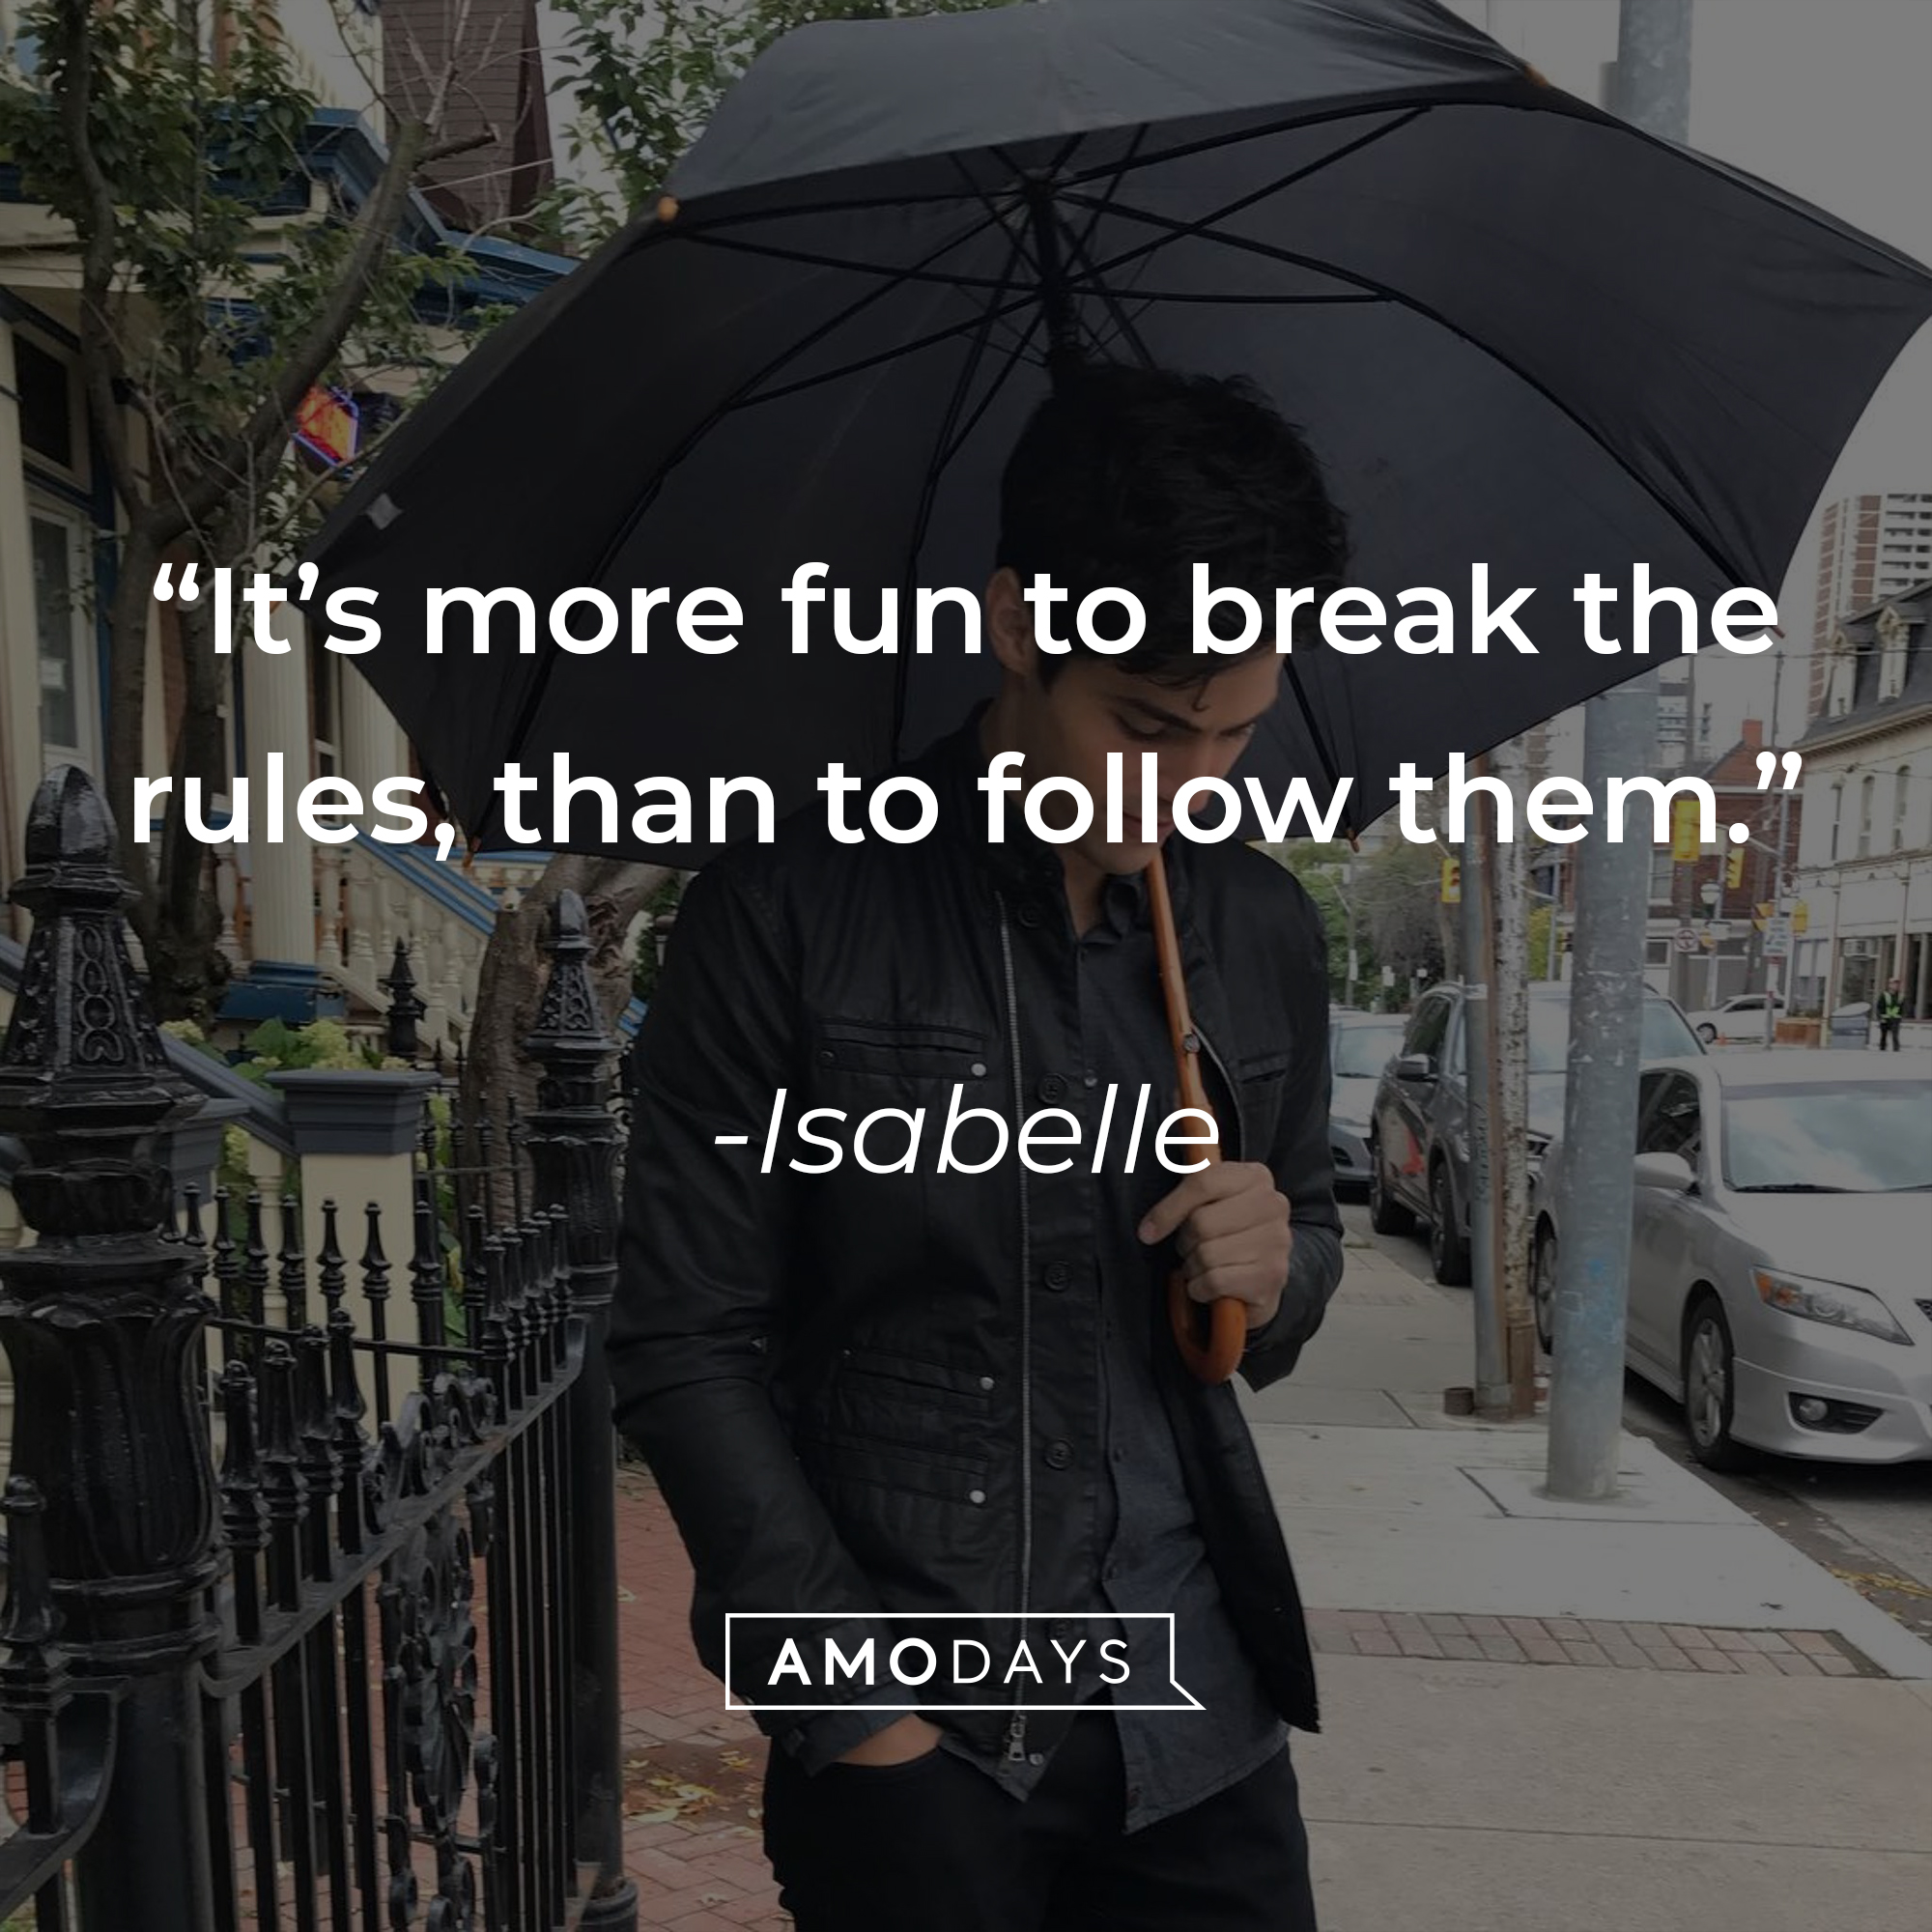 Isabelle's quote: "It's more fun to break the rules, than to follow them."┃Source: facebook.com/ShadowhuntersSeries